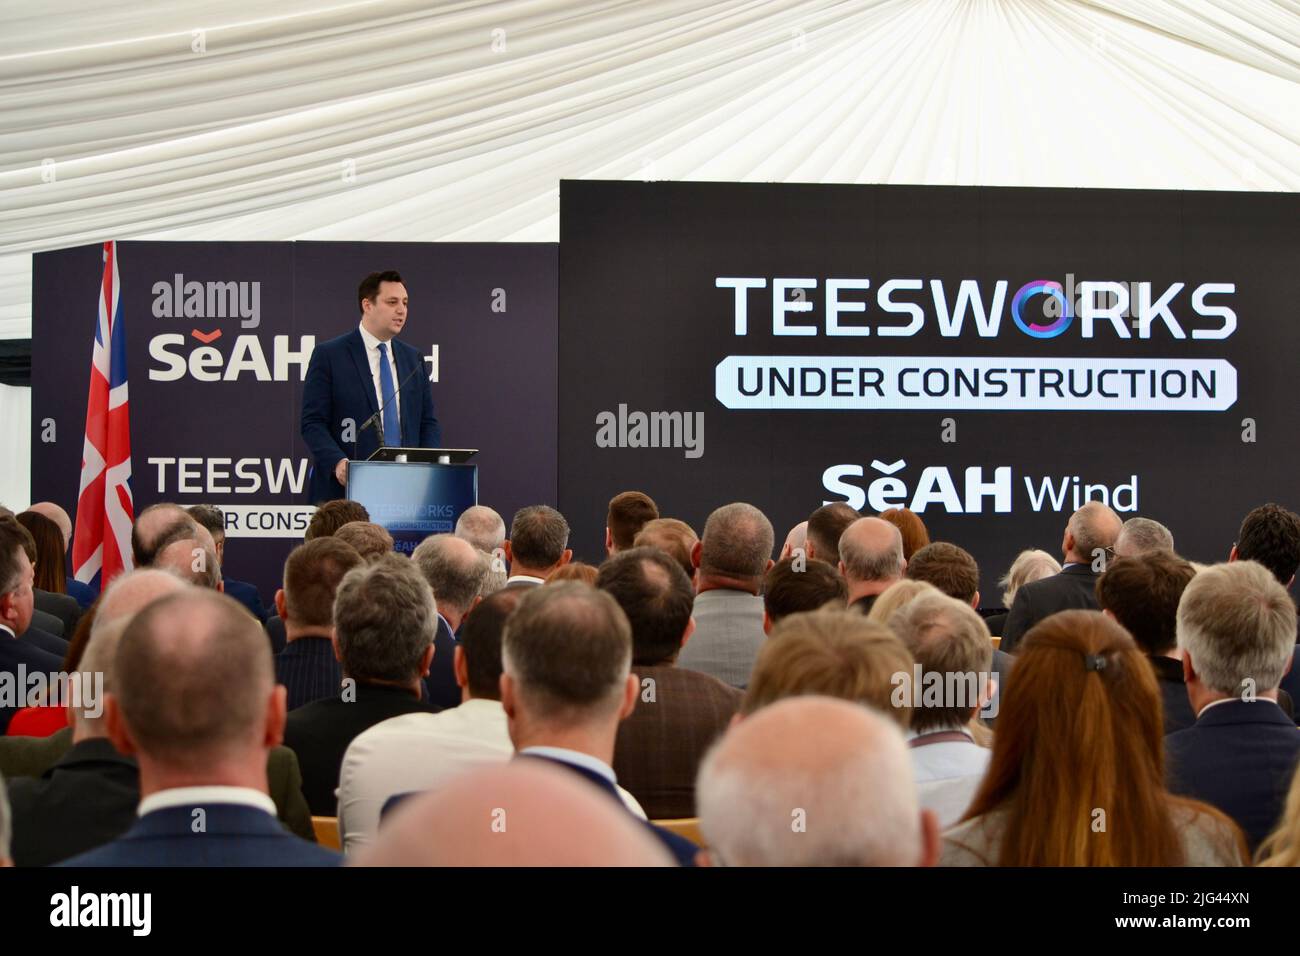 Redcar, UK. 07 Jul 2022. Tees Valley Mayor Ben Houchen pictured as construction has started on SeAH Wind Ltd’s offshore wind facility marking the first major private sector investment beginning construction at a UK Freeport. Mr Houchen took part in an official signing ceremony, presentations and the ground breaking for the £400million facility, along with representatives from the Government and SeAH Wind, with more than 200 local business leaders also attending. Credit: Teesside Snapper/Alamy Live News Stock Photo